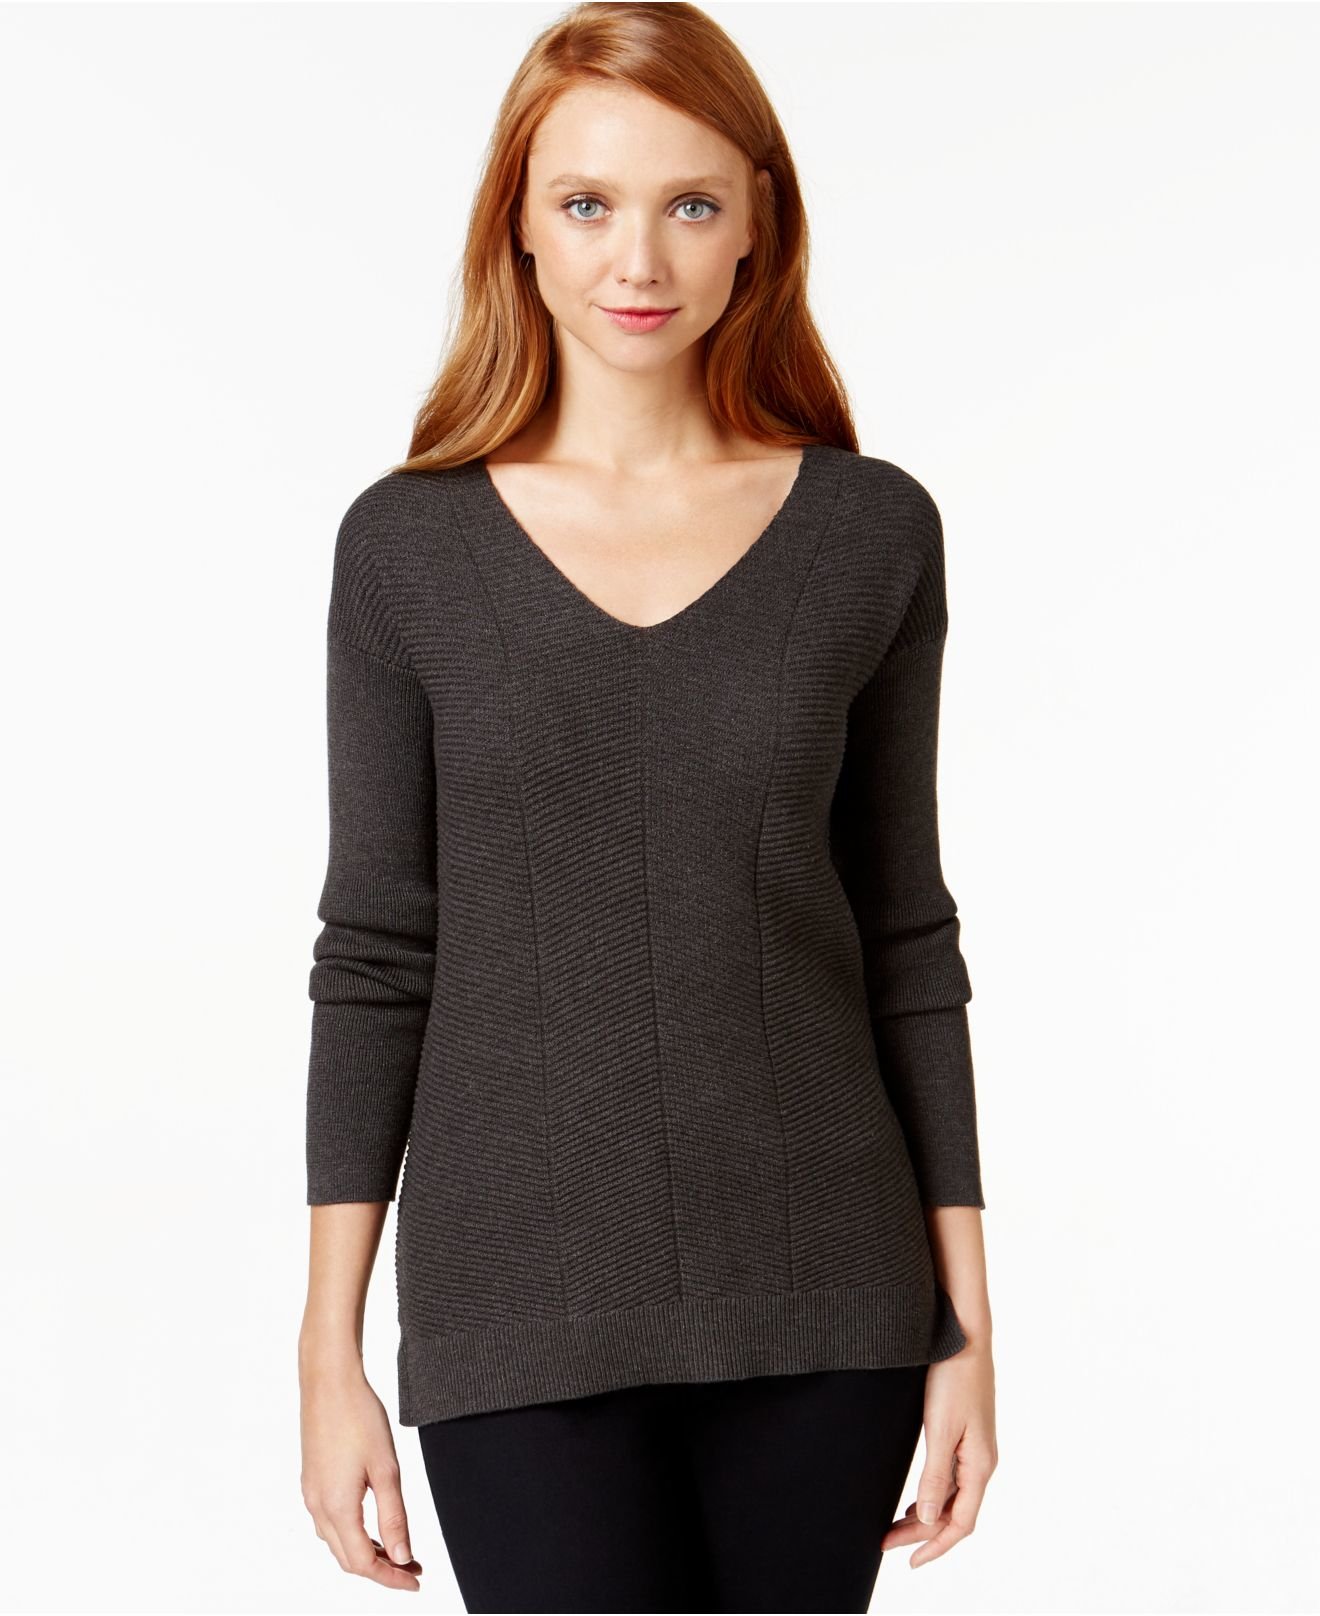 Lyst - Calvin Klein Jeans V-neck Knit Sweater in Gray